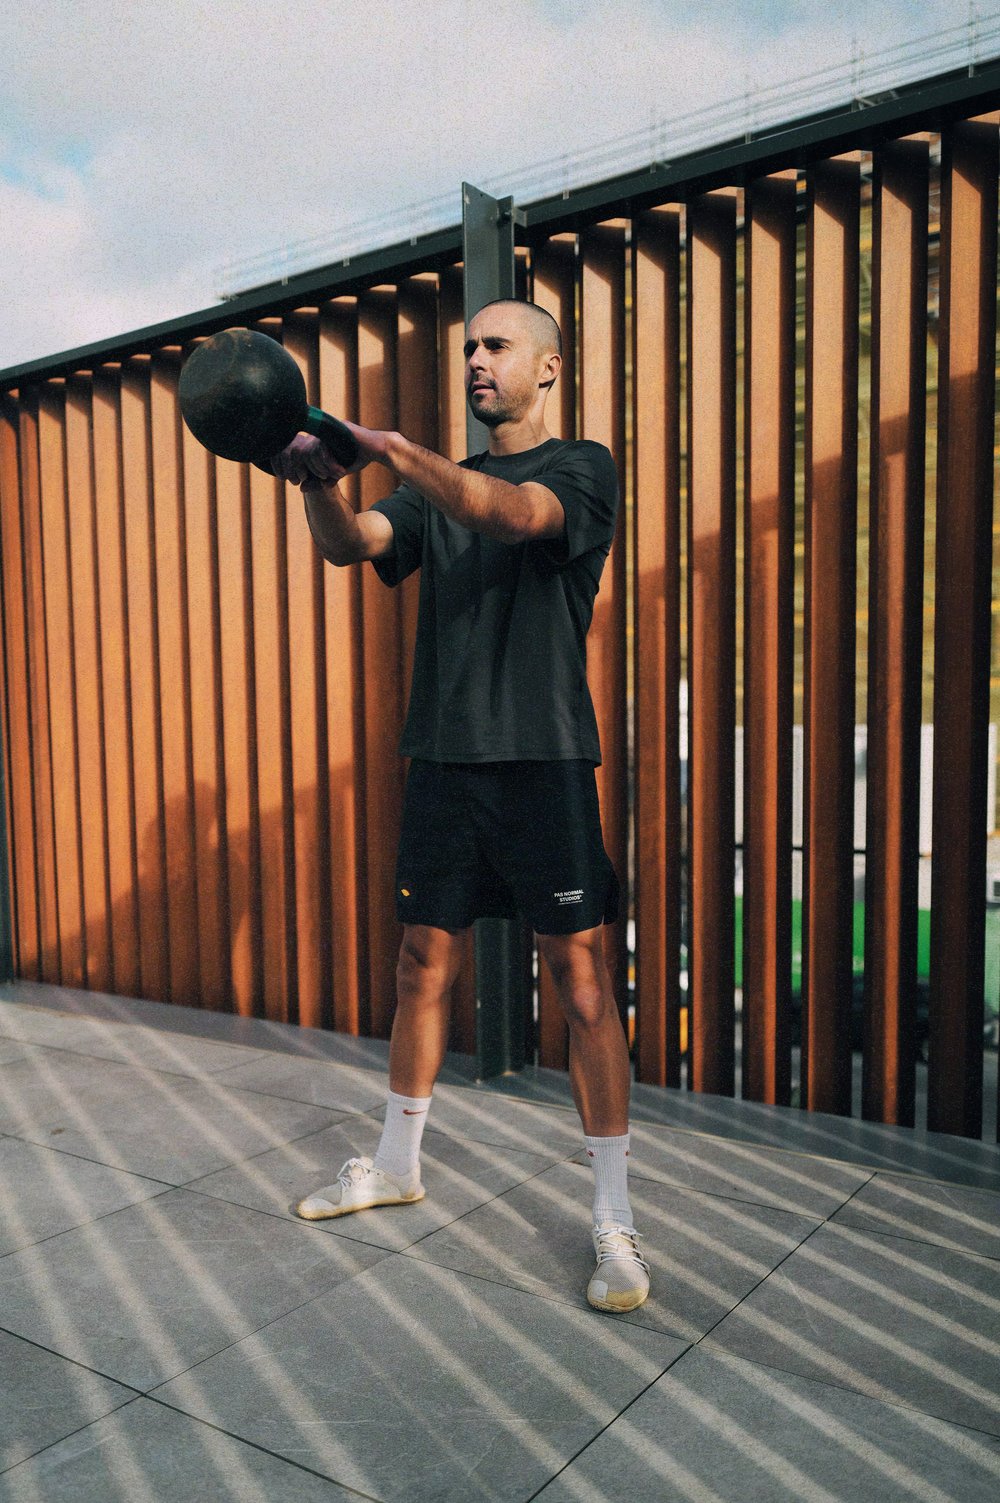  Step-by-step guide on executing a perfect kettlebell swing for enhancing cyclist's power and explosiveness. 